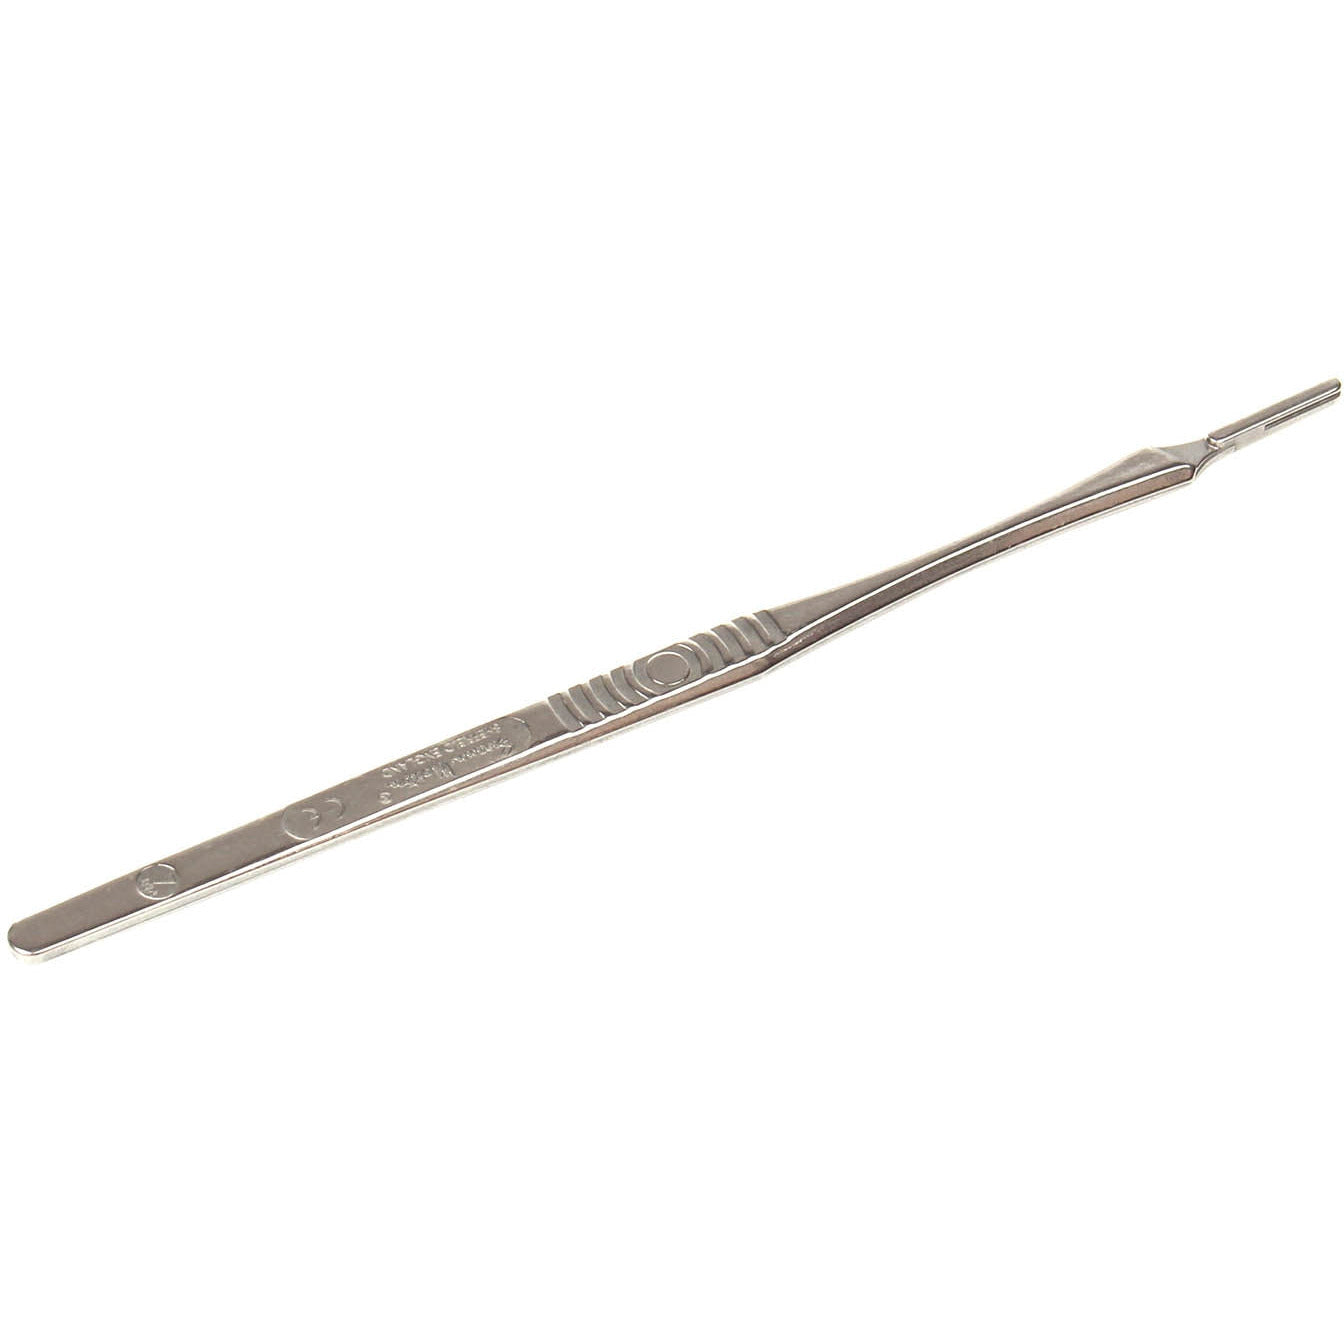 Surgical Scalpel Handle No. 7 - Stainless Steel